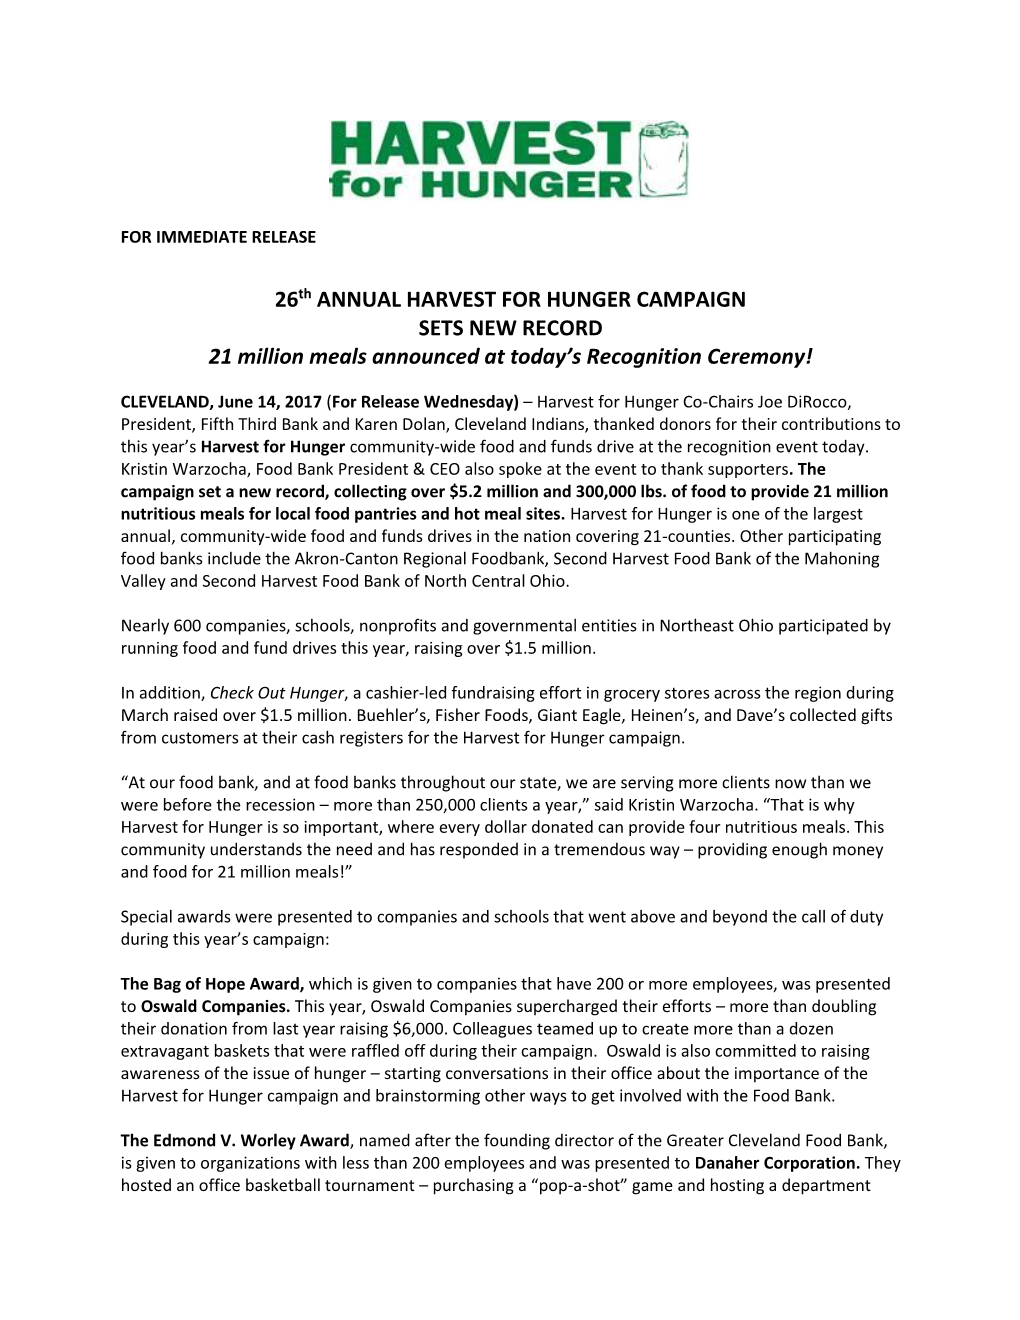 26Th ANNUAL HARVEST for HUNGER CAMPAIGN SETS NEW RECORD 21 Million Meals Announced at Today’S Recognition Ceremony!